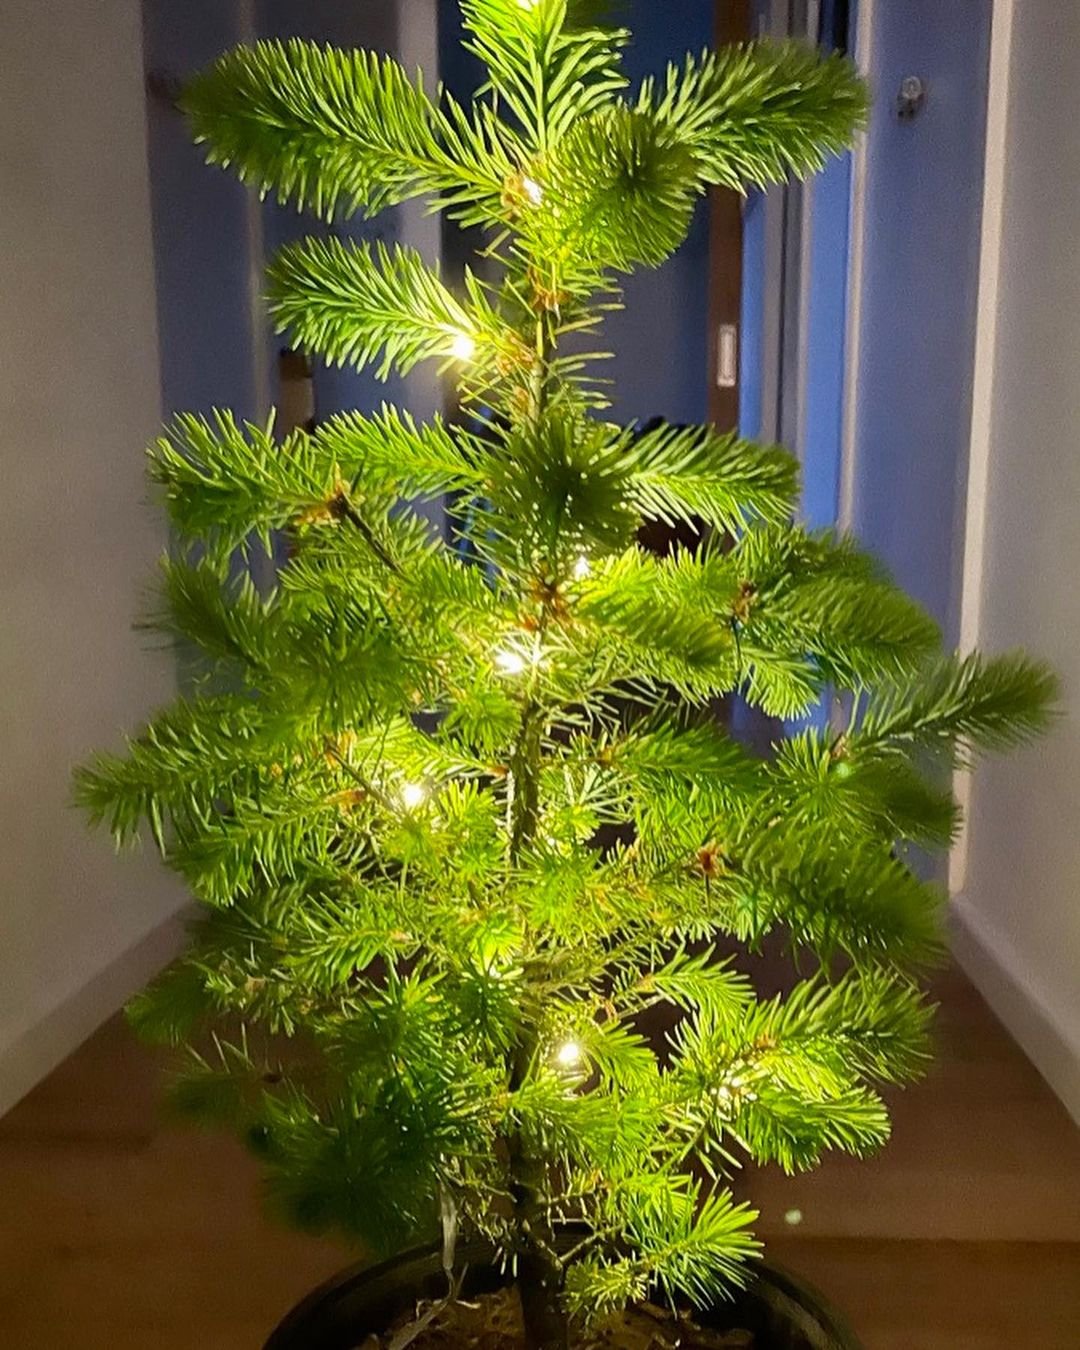 Small Douglas Fir tree adorned with twinkling lights.